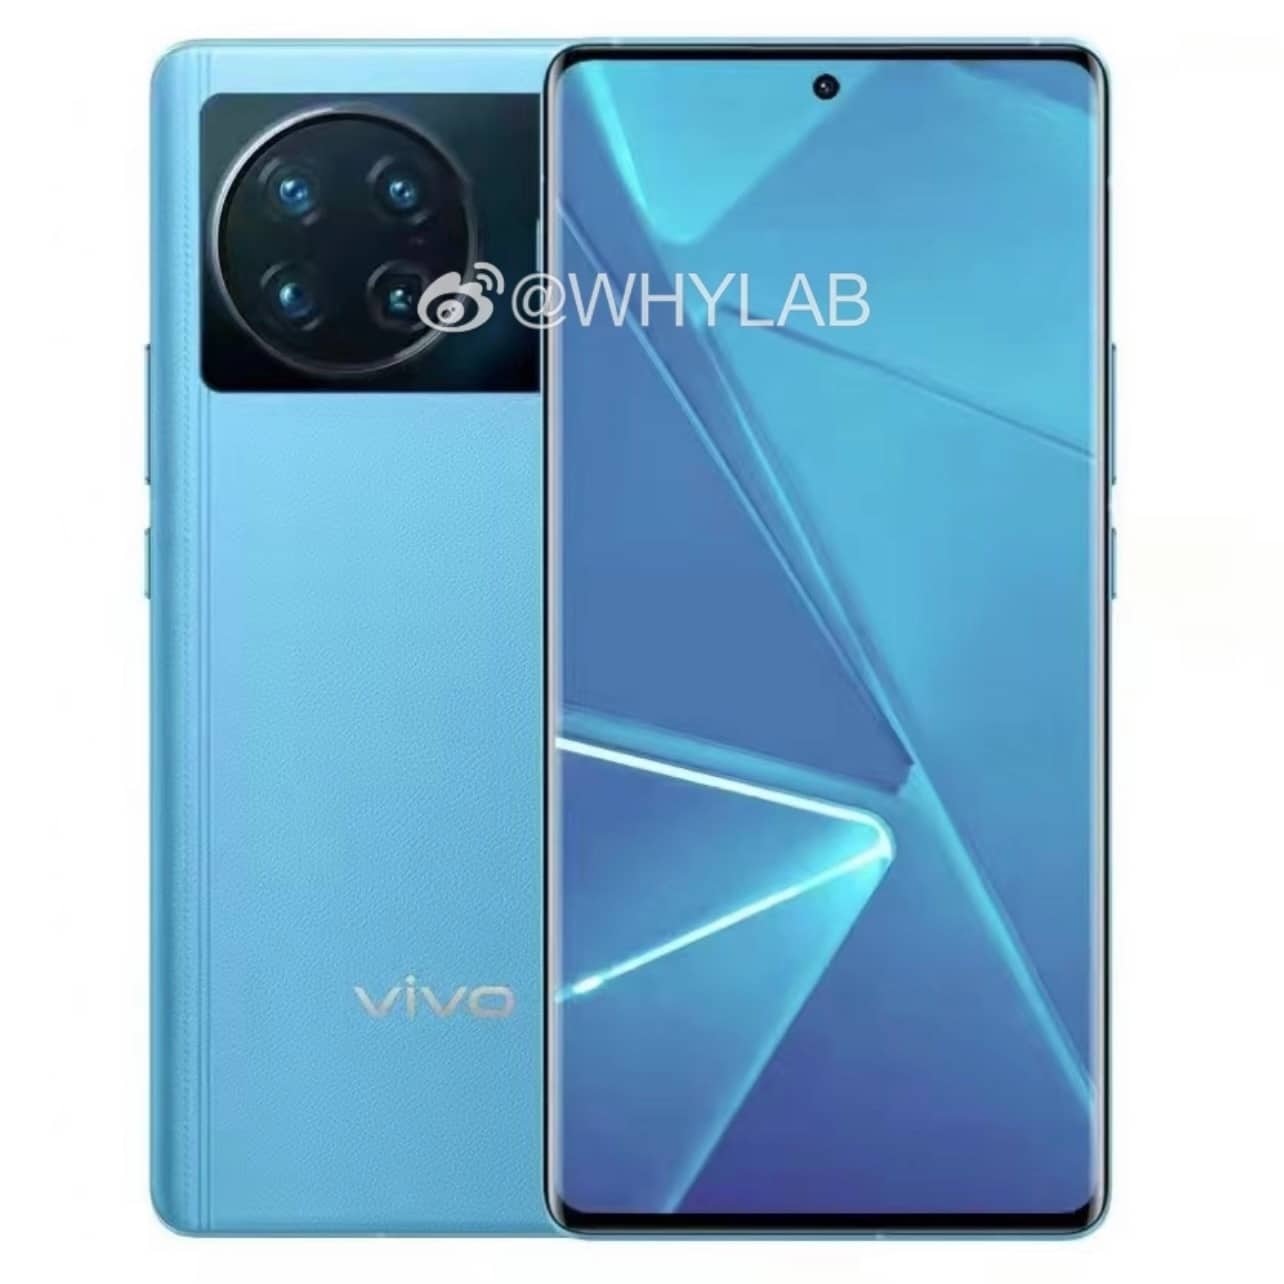 Vivo is Making a Samsung Galaxy Note Competitor [Images]